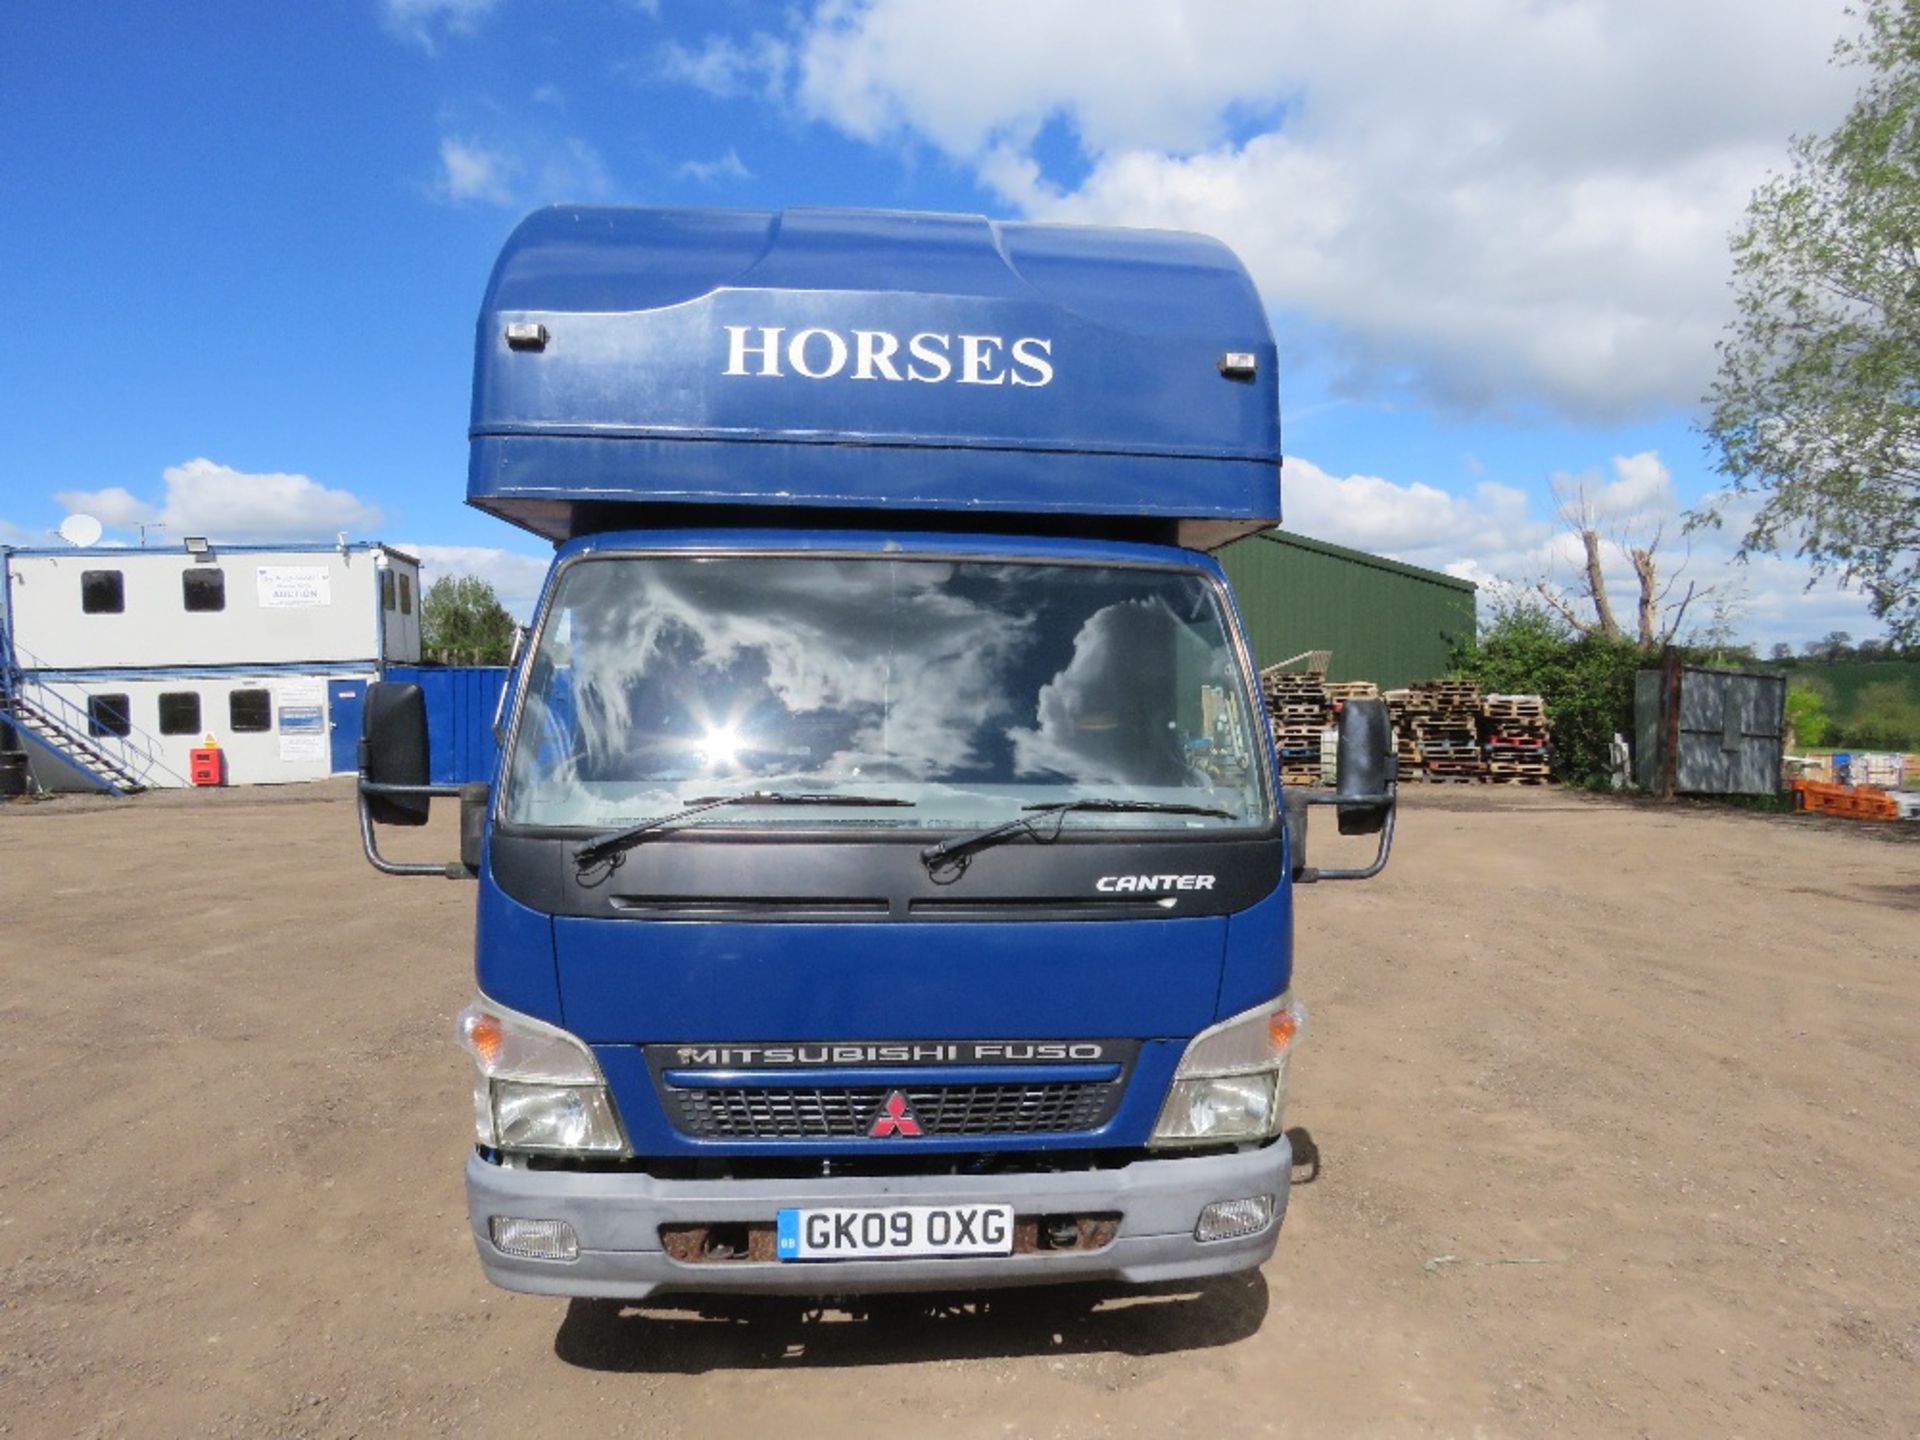 MITSUBISHI CANTER HORSE BOX LORRY REG:GK09 OXG. V5 AND PLATING CERTIFICATE IN OFFICE. MOT EXPIRED. - Image 3 of 24